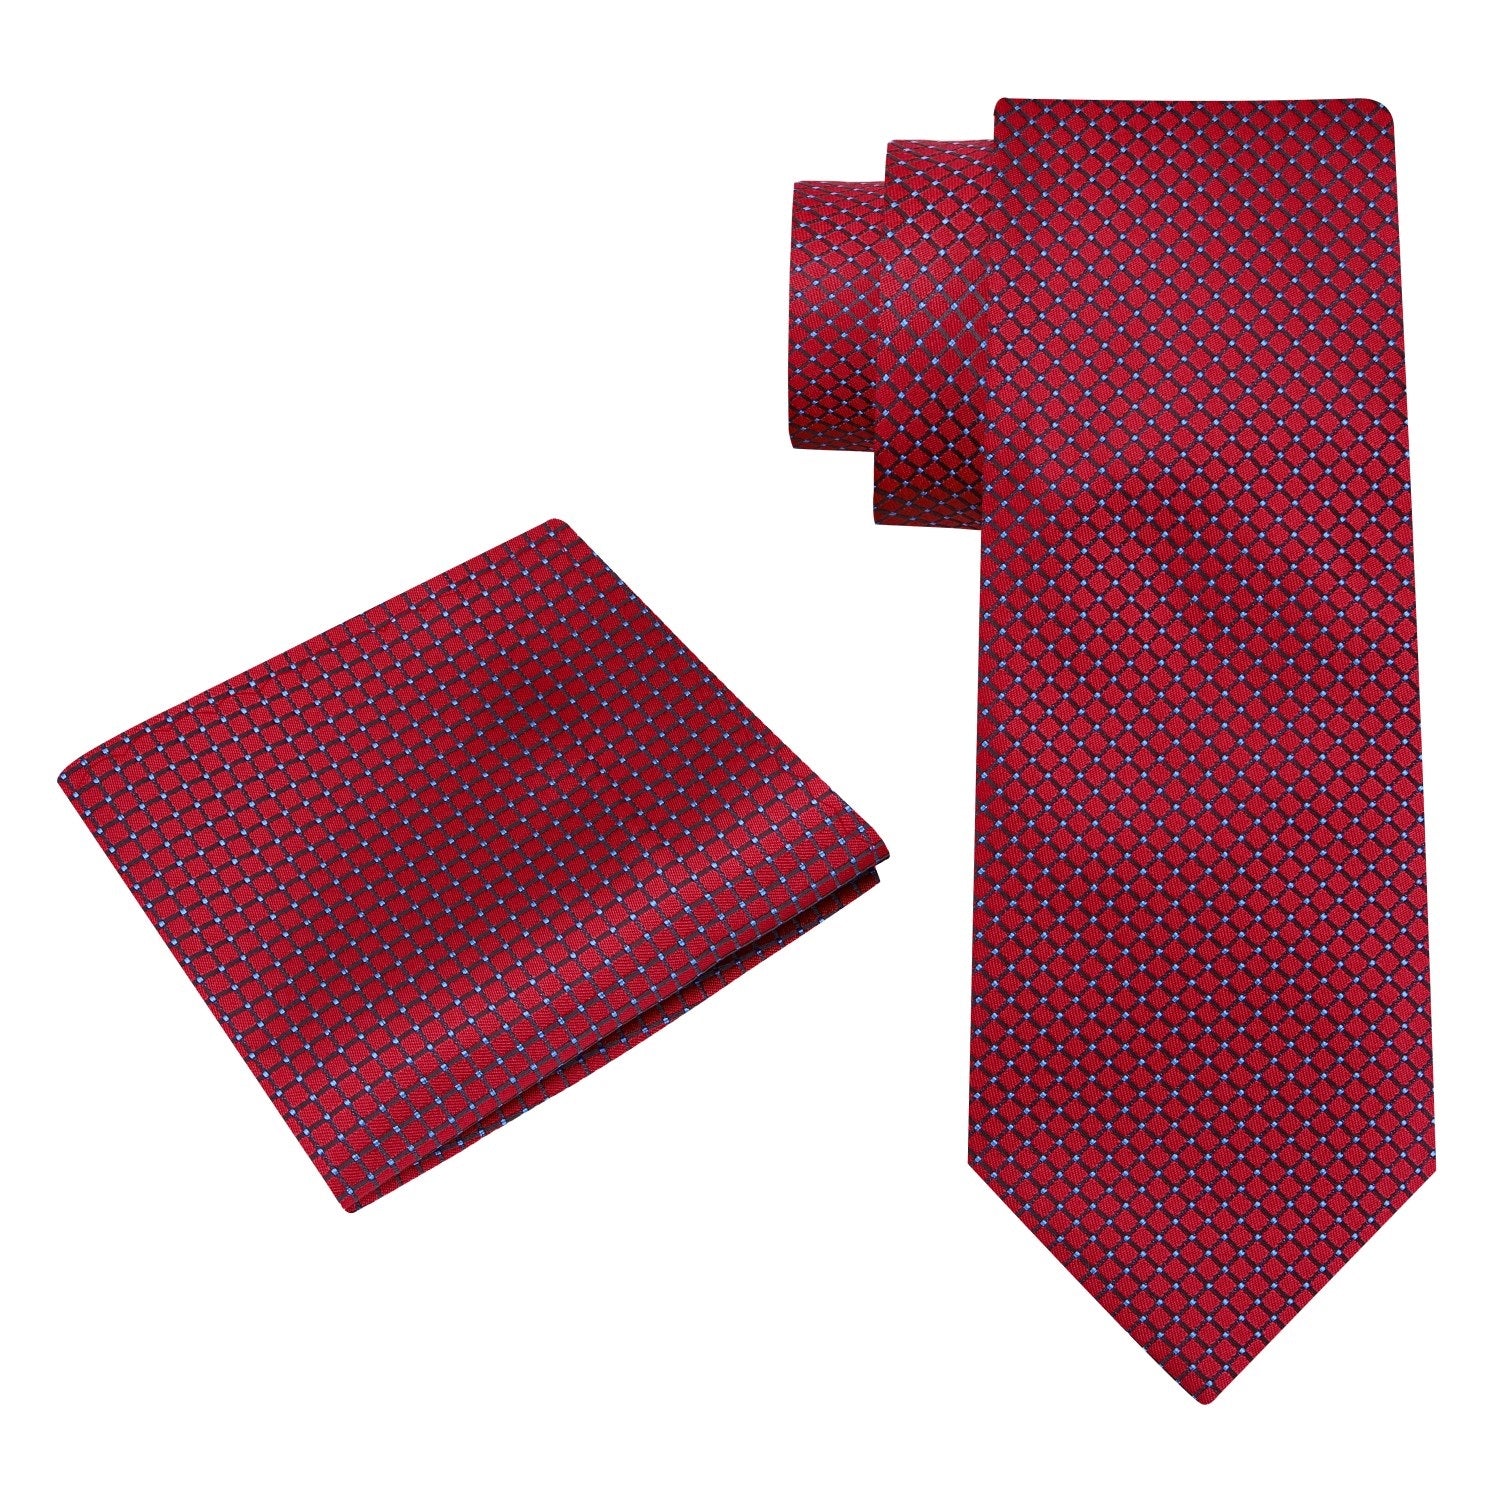 View 2: Deep Red Geometric Tie and Square